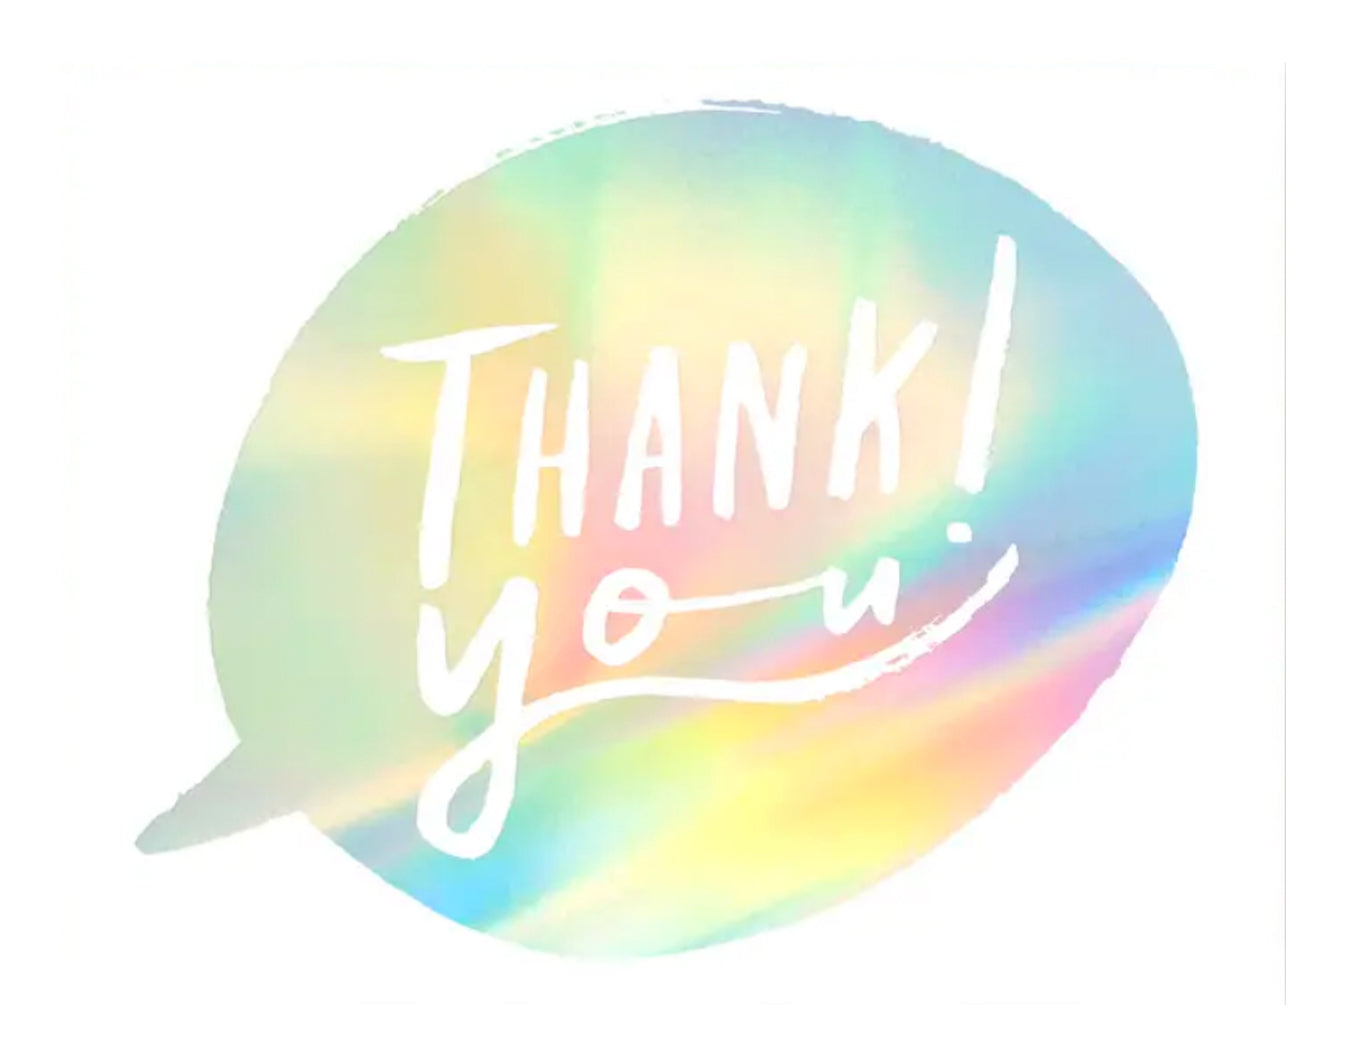 holographic text bubble with words thank you! inside